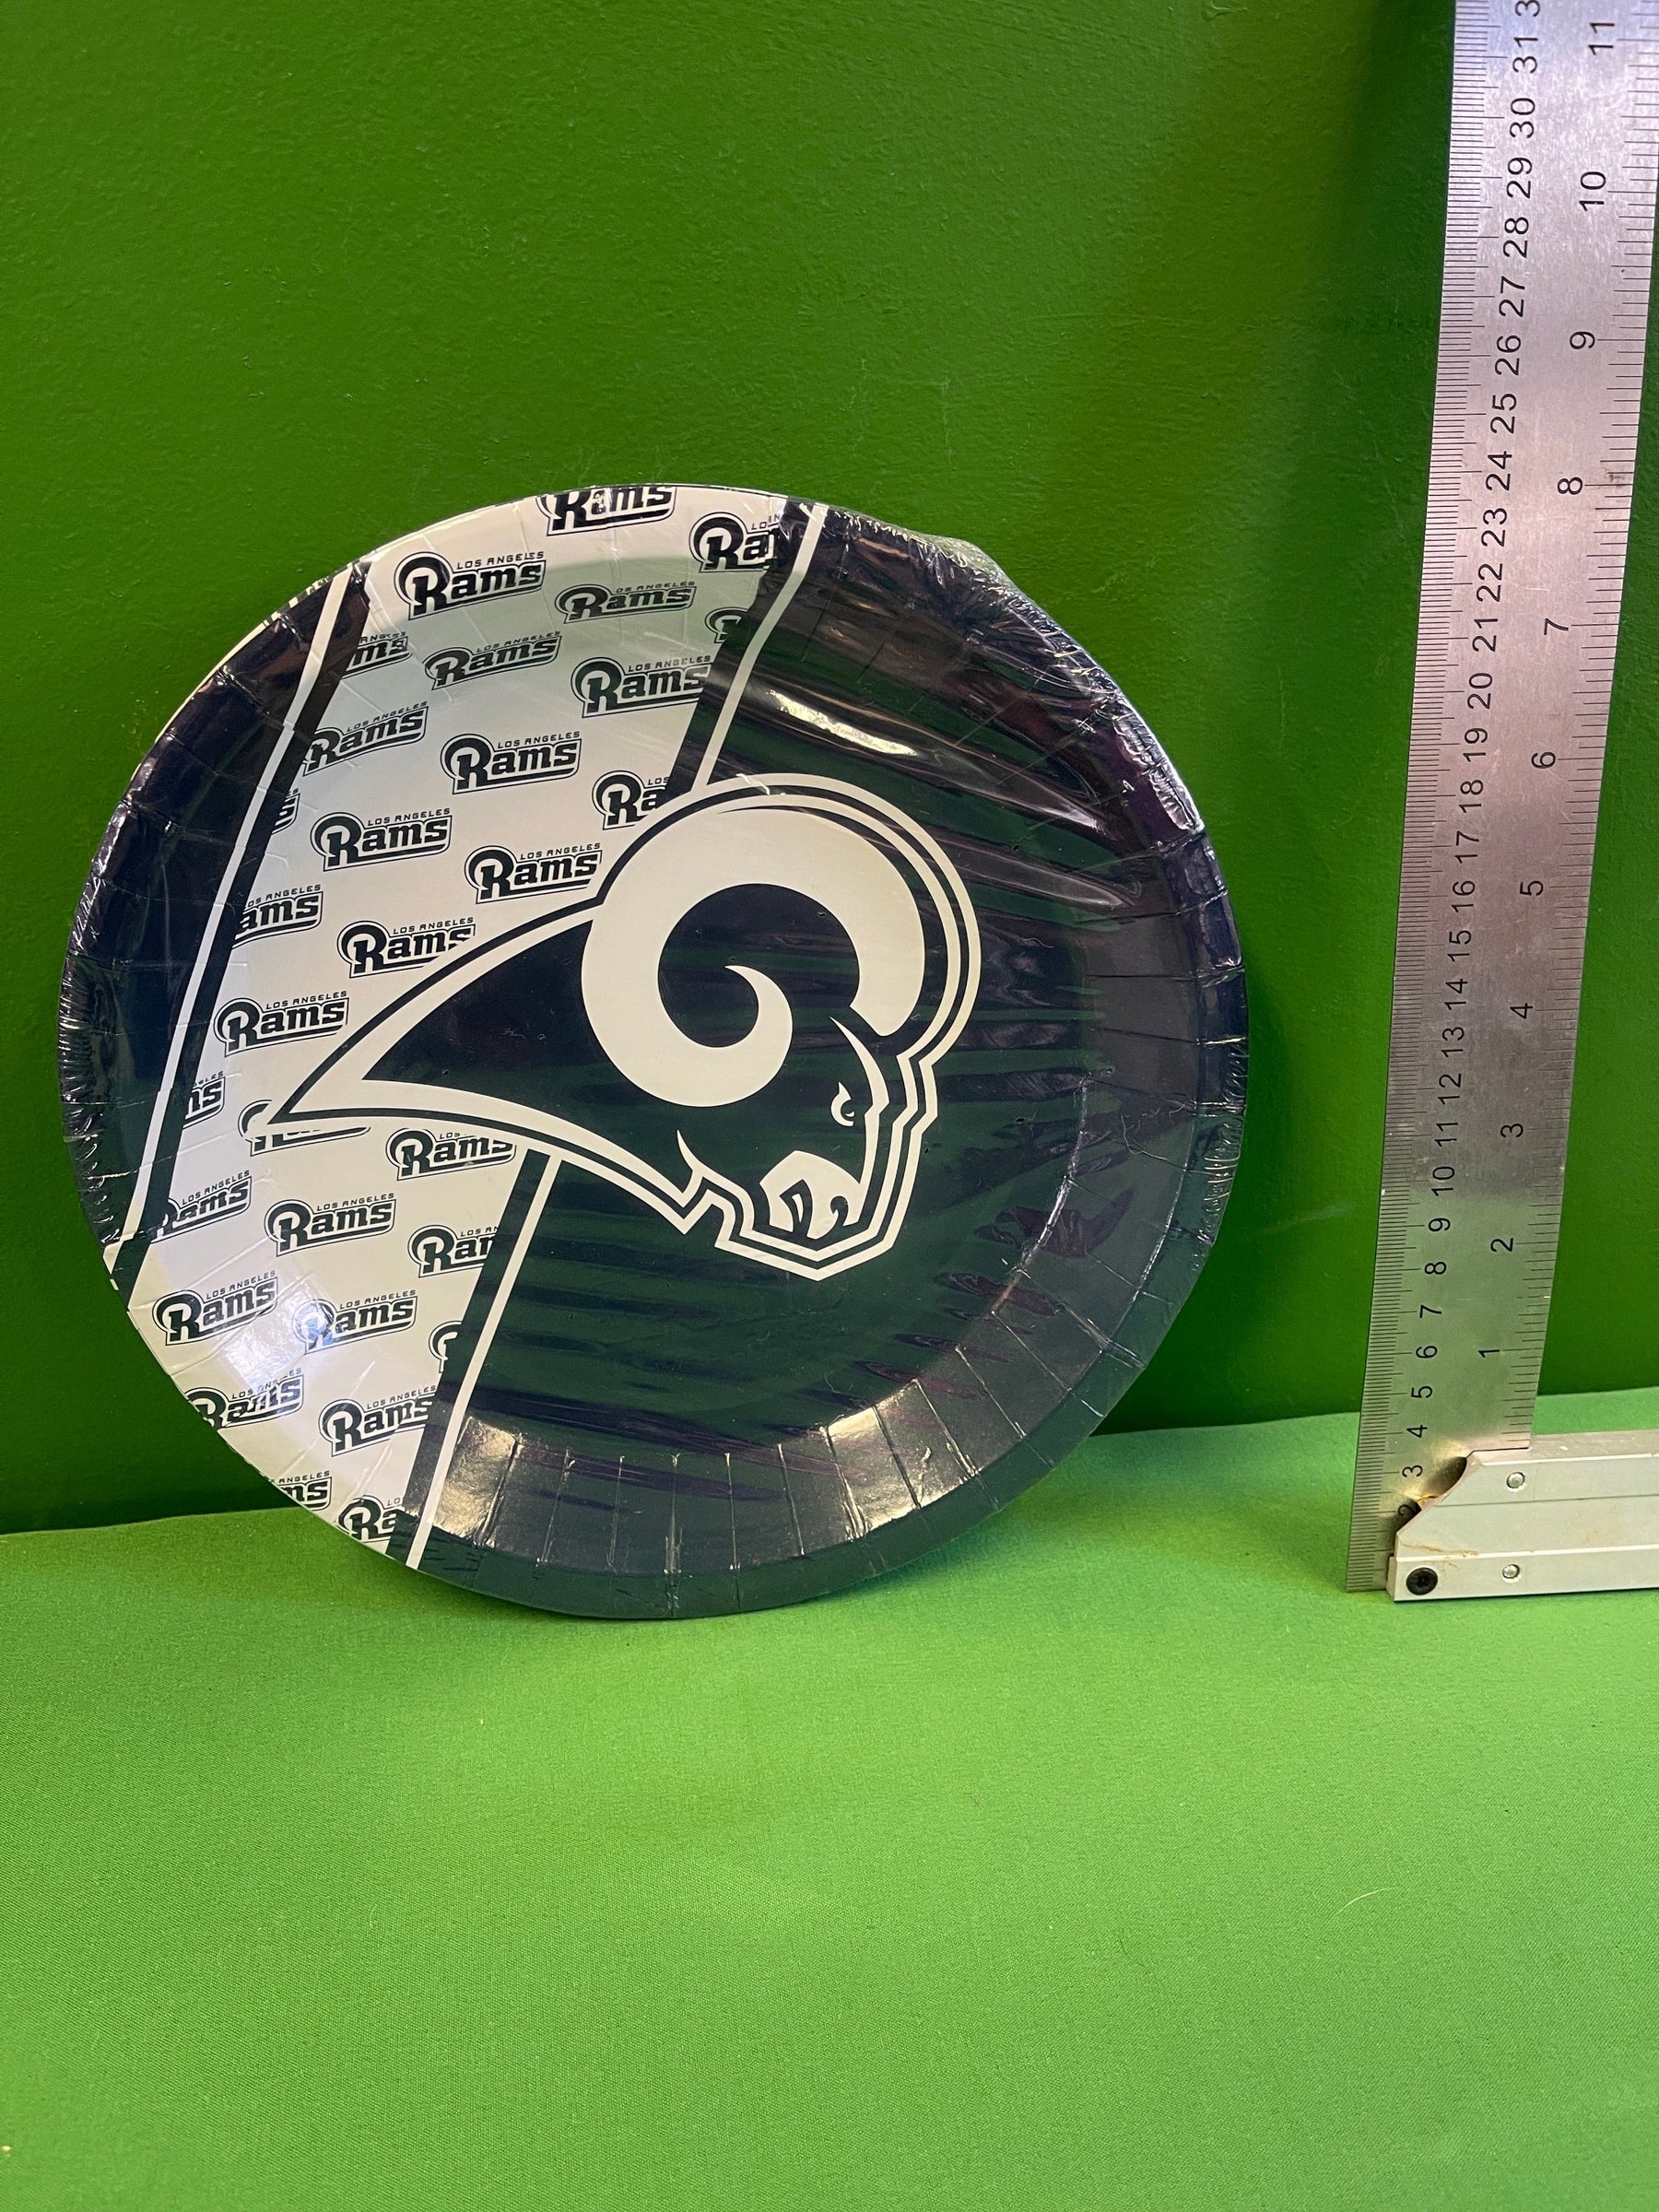 NFL Los Angeles Rams Set of 8 9.75" Disposable Party Paper Plates NWT